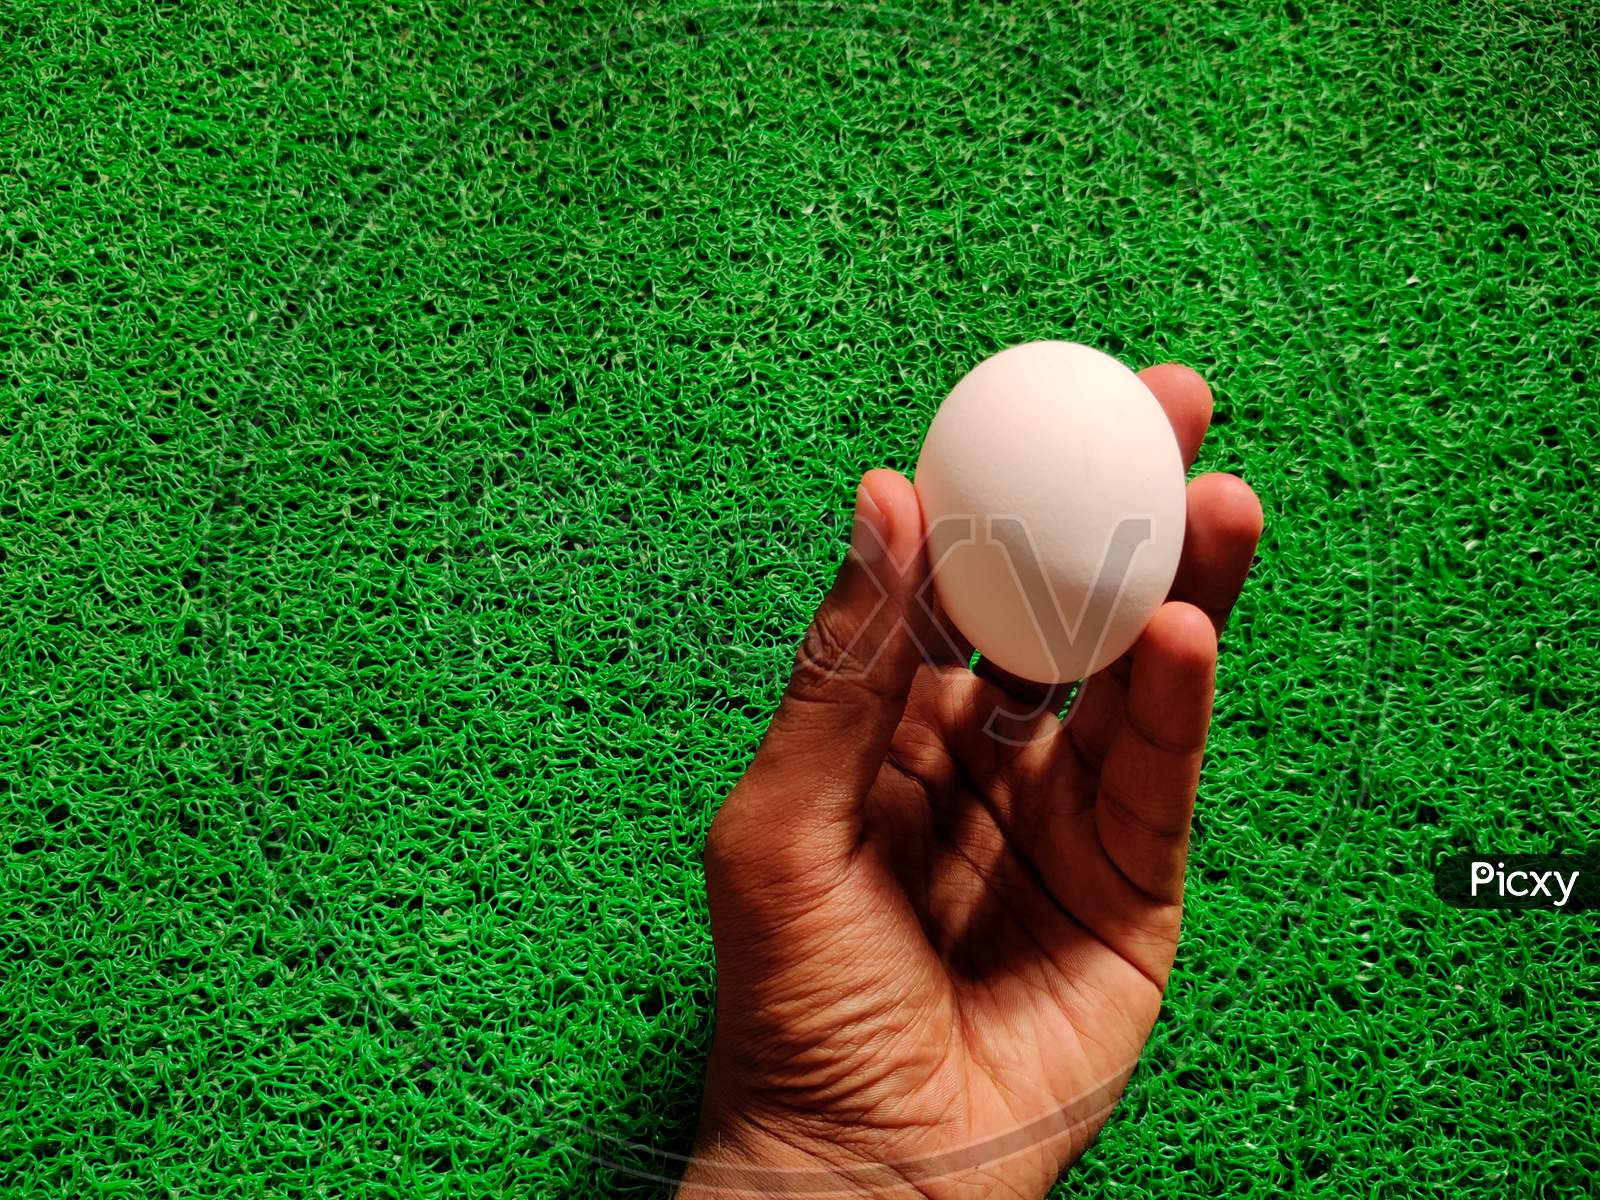 South Indian Male Hand Holding/Showing A Raw White Egg. Isolated On Green Background.